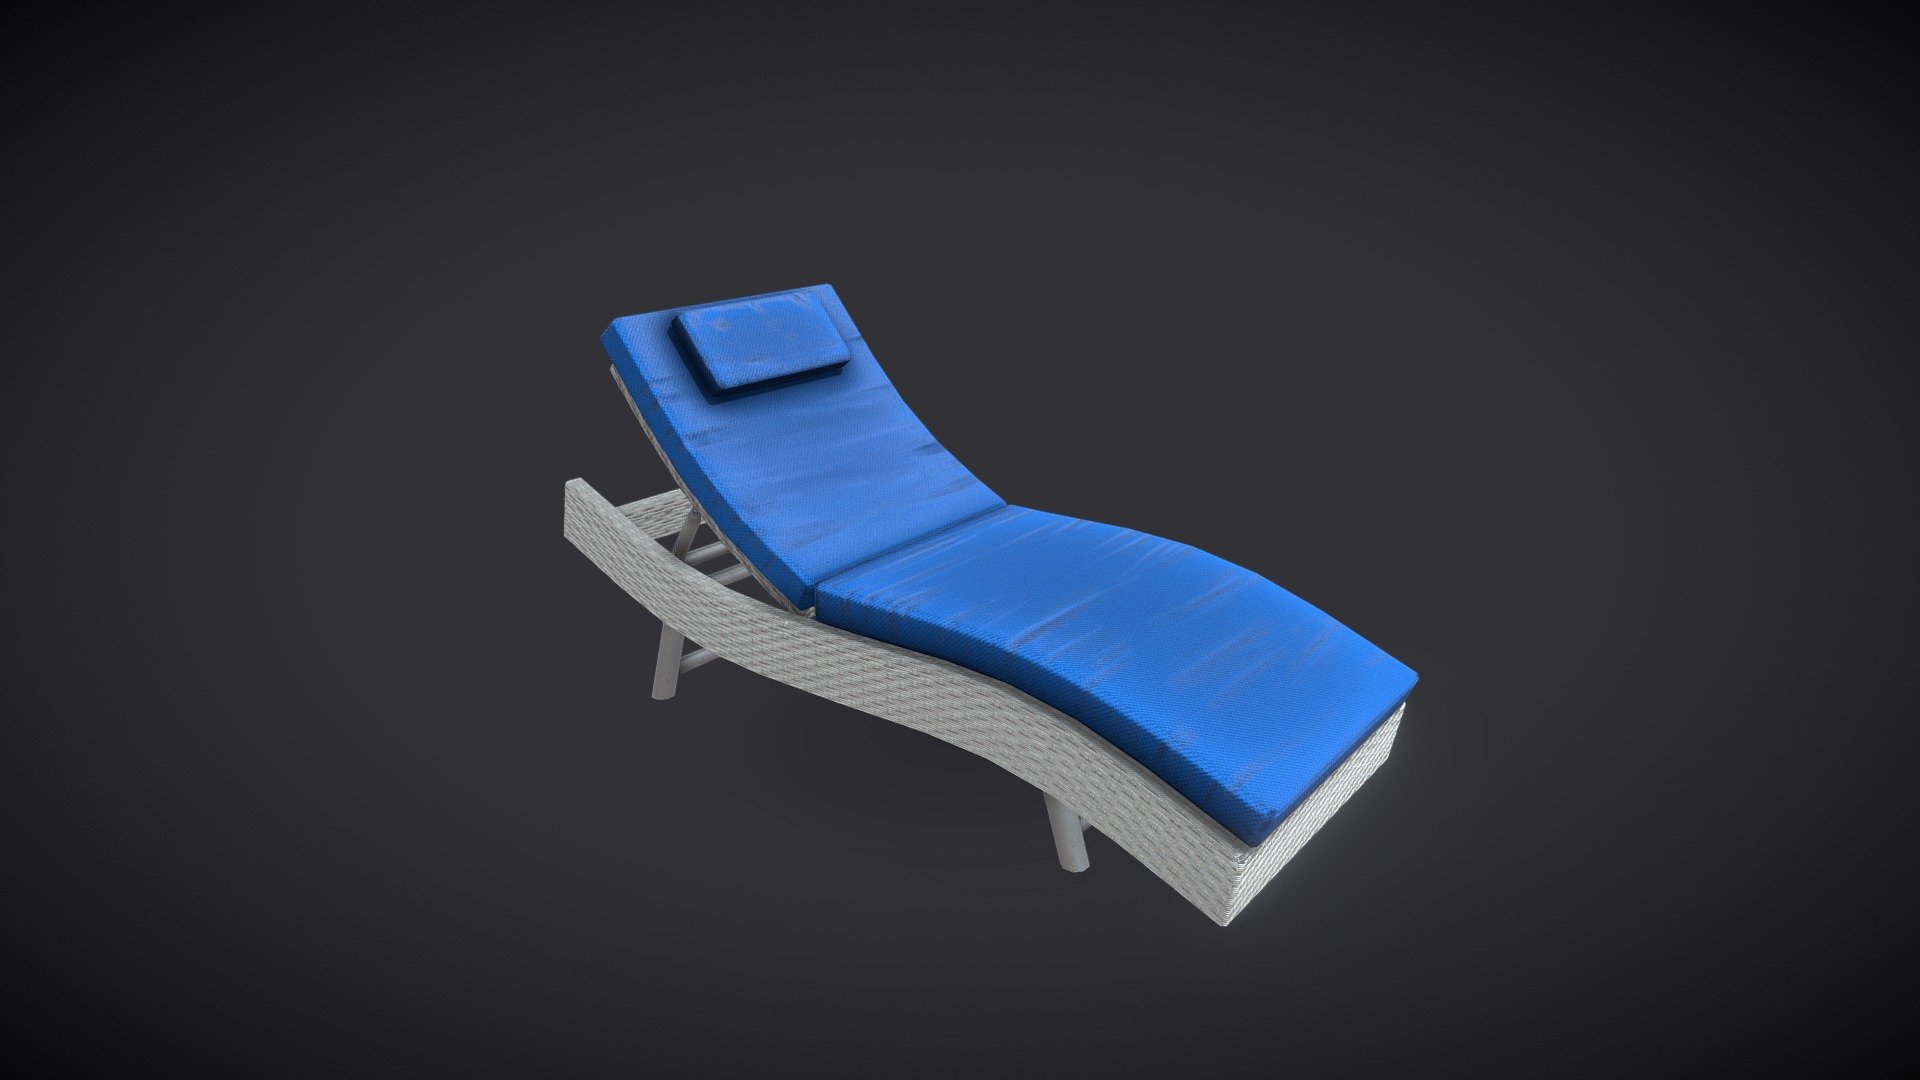 Greek Villa - Asset Pack





Beach Chair

.............

OVA’s flagship software, StellarX, allows those with no programming or coding knowledge to place 3D goods and create immersive experiences through simple drag-and-drop actions. 

Storytelling, which involves a series of interactions, sequences, and triggers are easily created through OVA’s patent-pending visual scripting tool. 

.............

**Download StellarX on the Meta Quest Store: oculus.com/experiences/quest/8132958546745663
**

**Download StellarX on Steam: store.steampowered.com/app/1214640/StellarX
**

Have a bigger immersive project in mind? Get in touch with us! 



StellarX on LinkedIn: linkedin.com/showcase/stellarx-by-ova

Join the StellarX Discord server! 

........

StellarX© 2022 - Beach Chair - Buy Royalty Free 3D model by StellarX 3d model